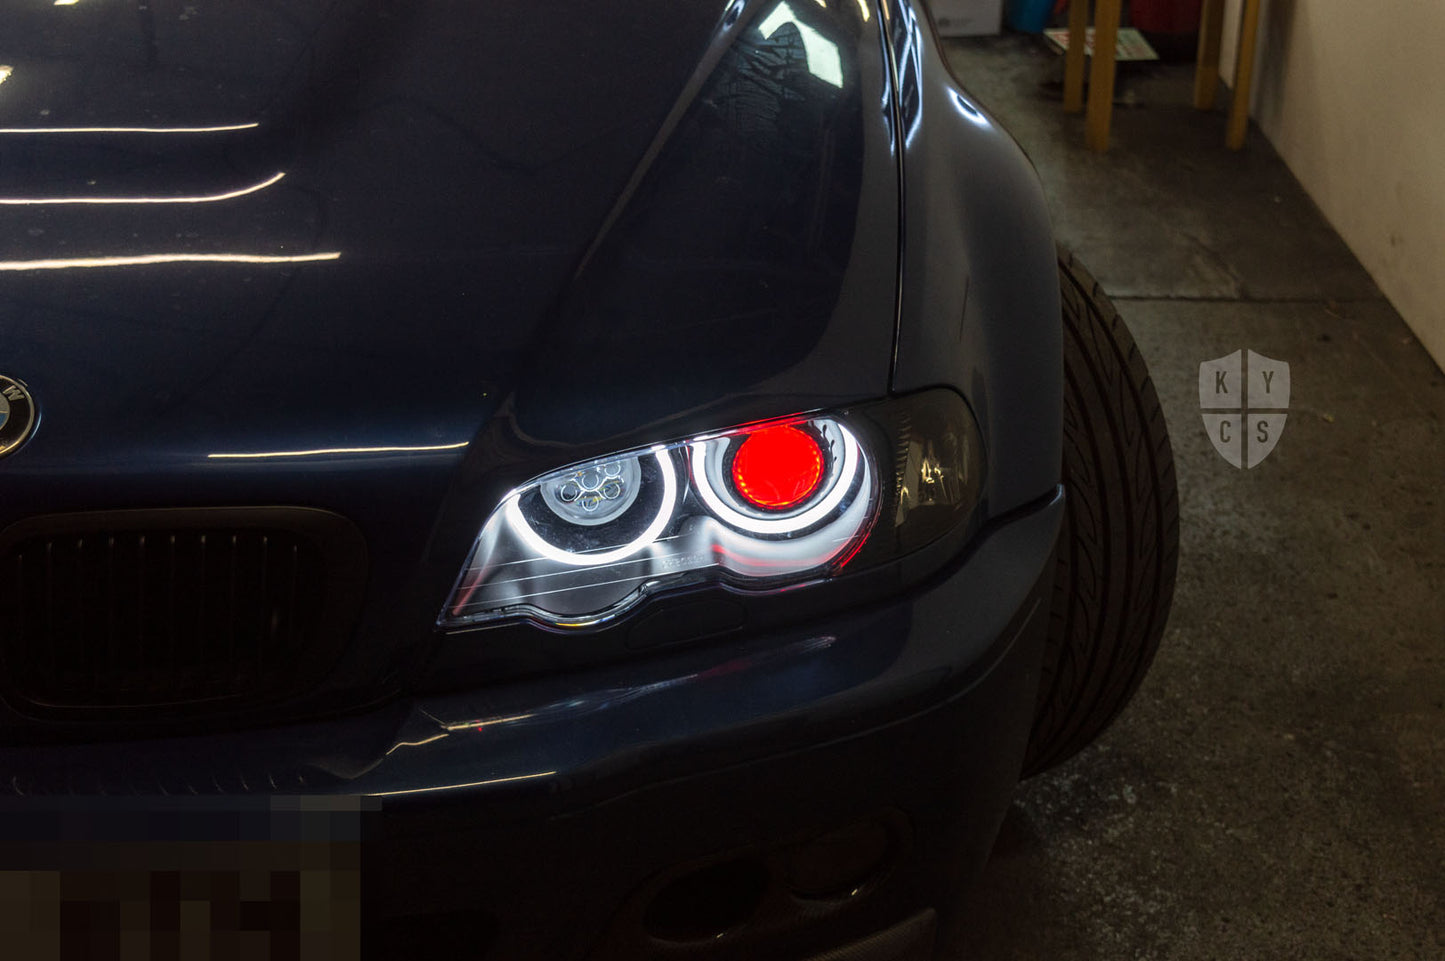 Headlight options on the above vehicle: KYCS (white) angel eyes | Classic blackout | Upgraded high beam (high beam LED unit array style) | Red demon eye | New headlight plastic lenses/covers